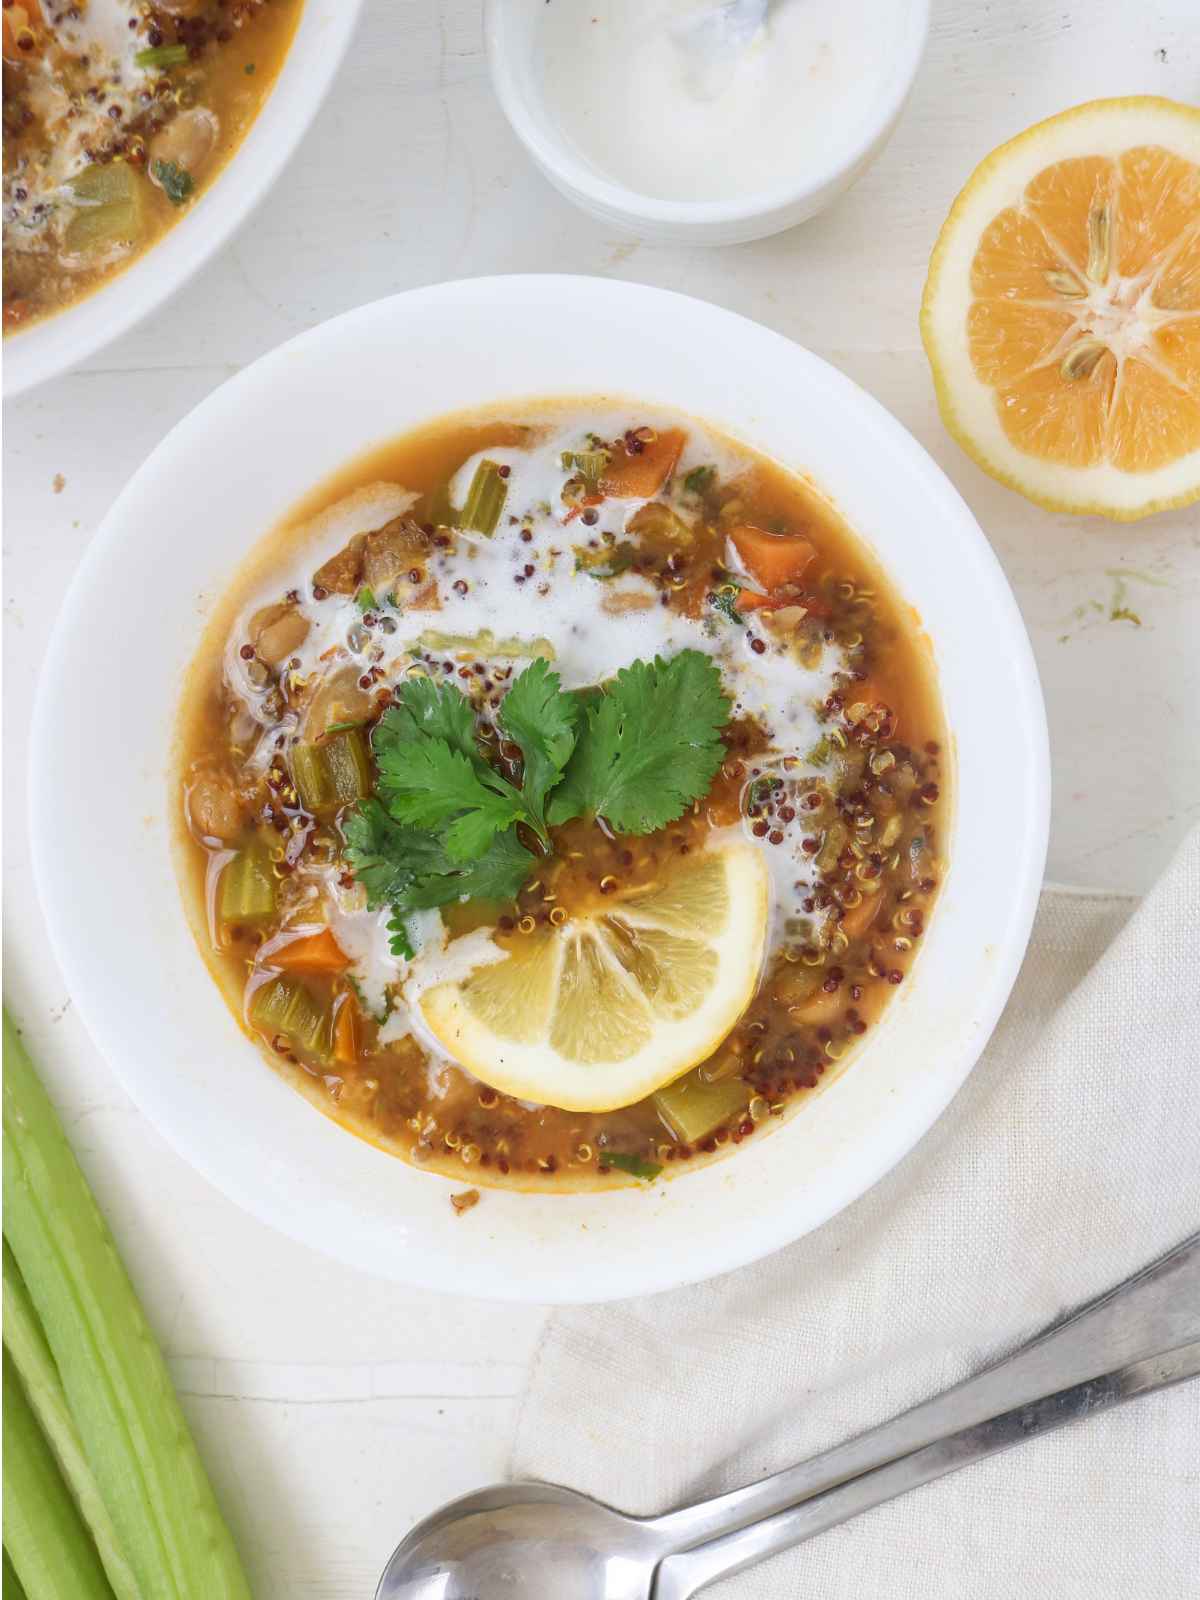 Quinoa and Chickpea Stew served in white bowl garnished with lemon wedge and green cilantro leaves.